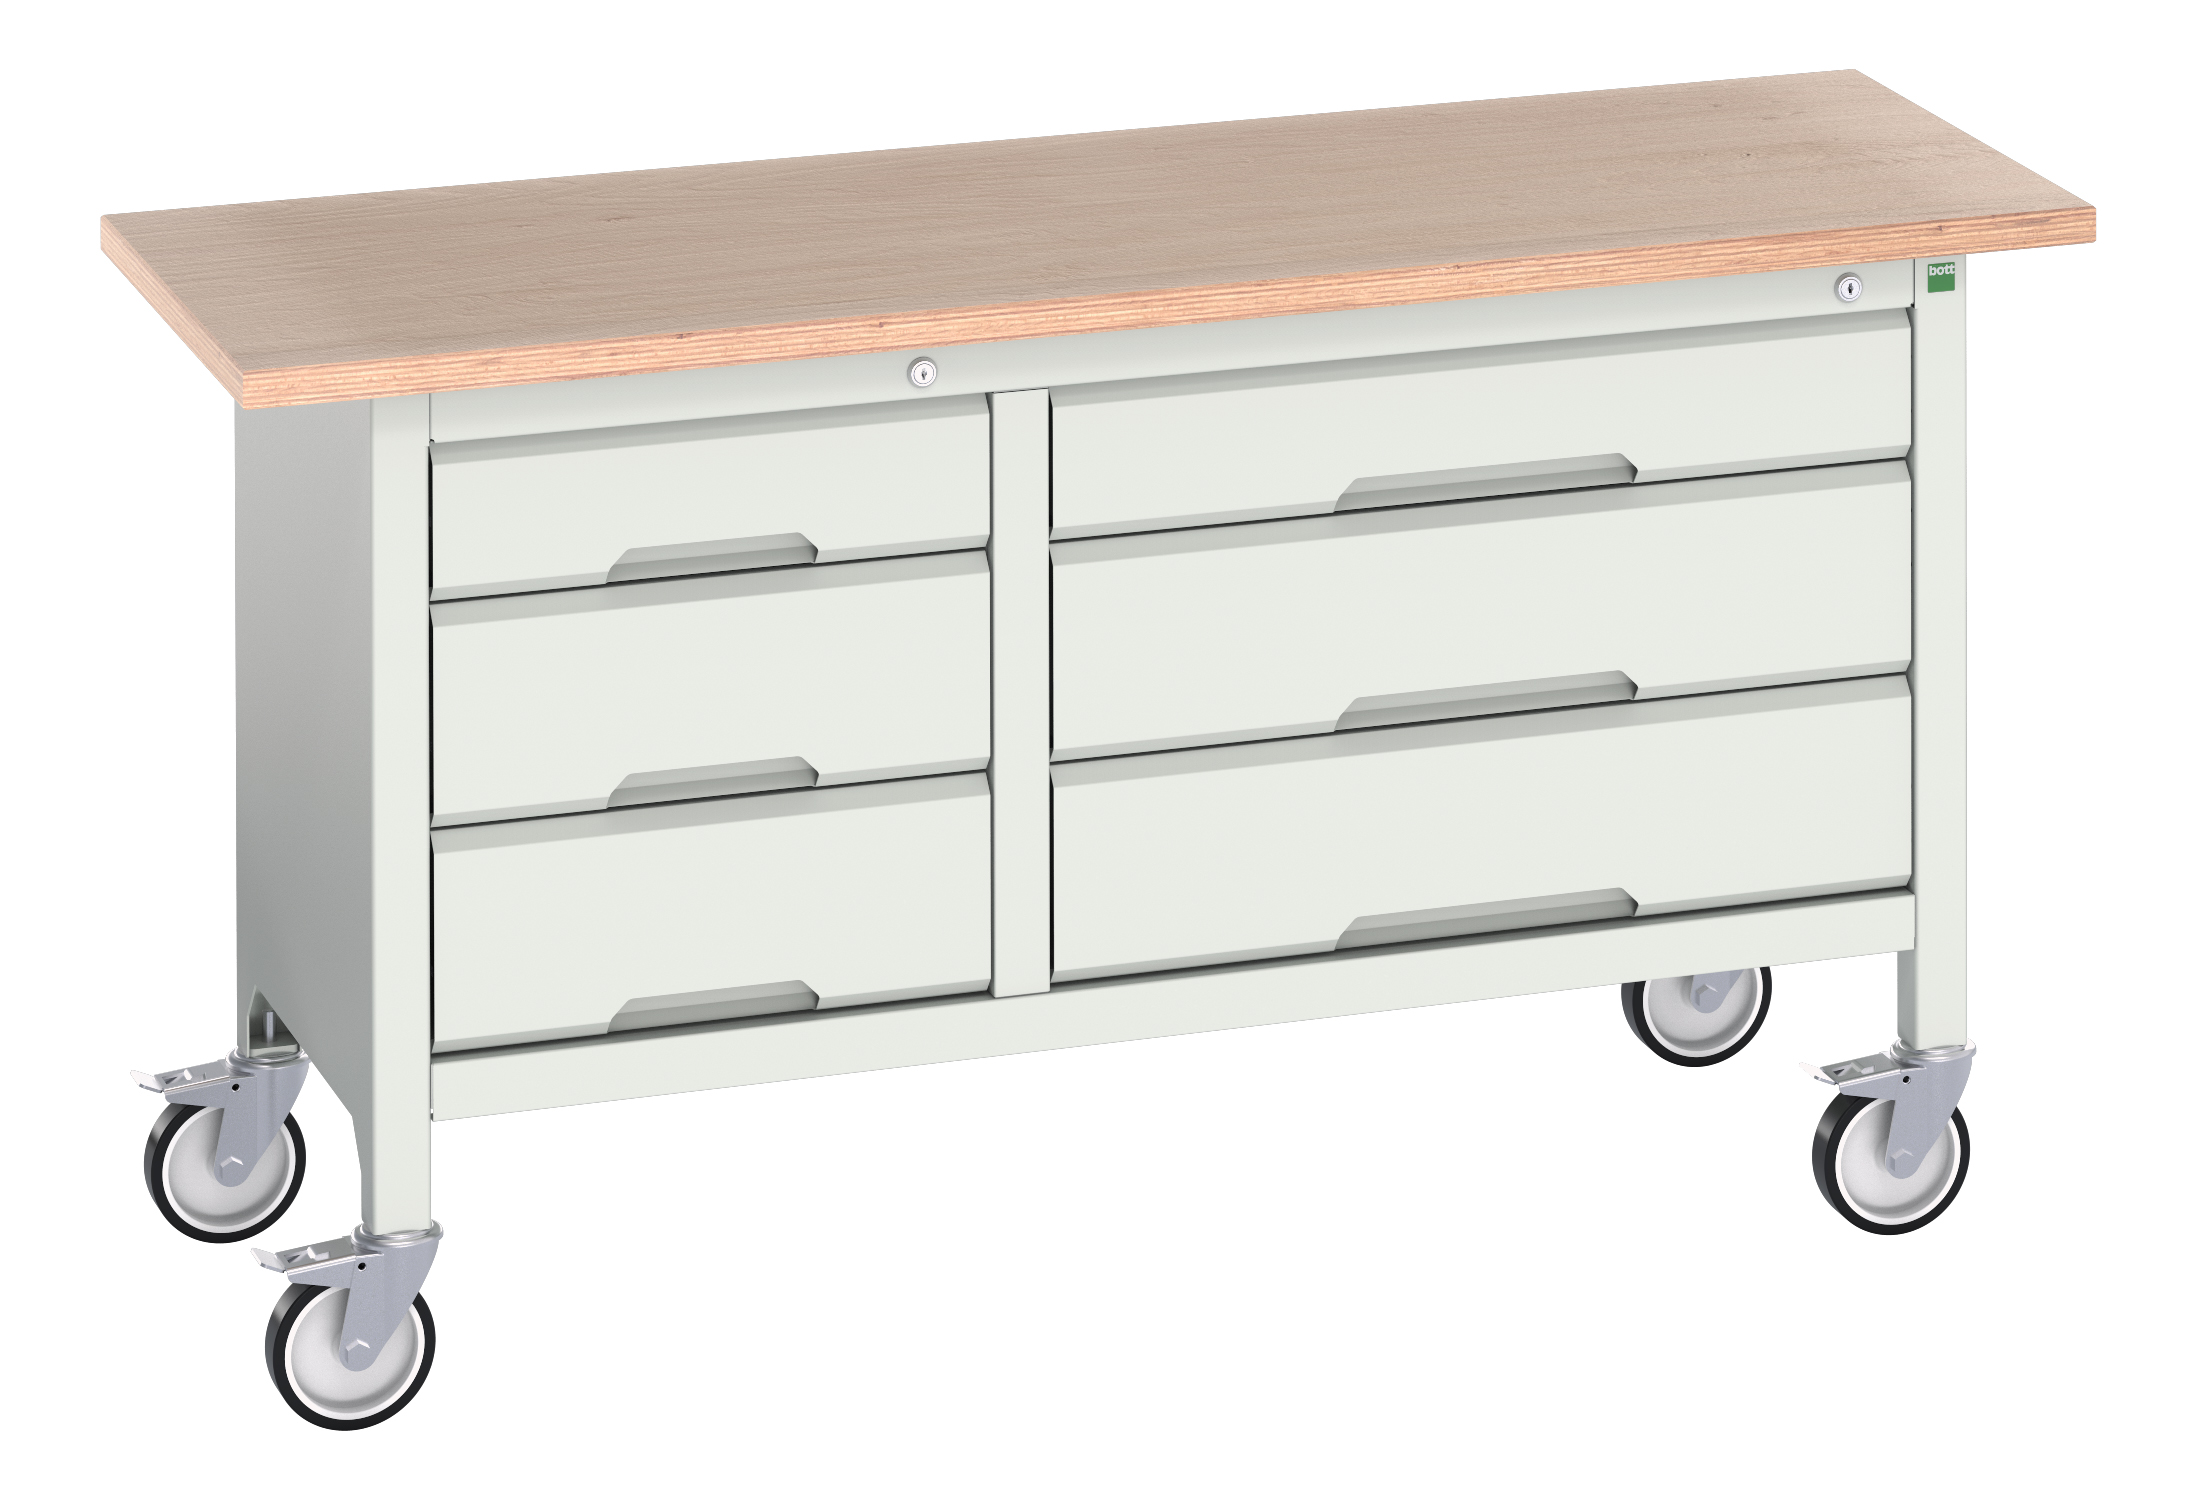 Bott Verso Mobile Storage Bench With 3 Drawer Cabinet / 3 Drawer Cabinet - 16923215.16